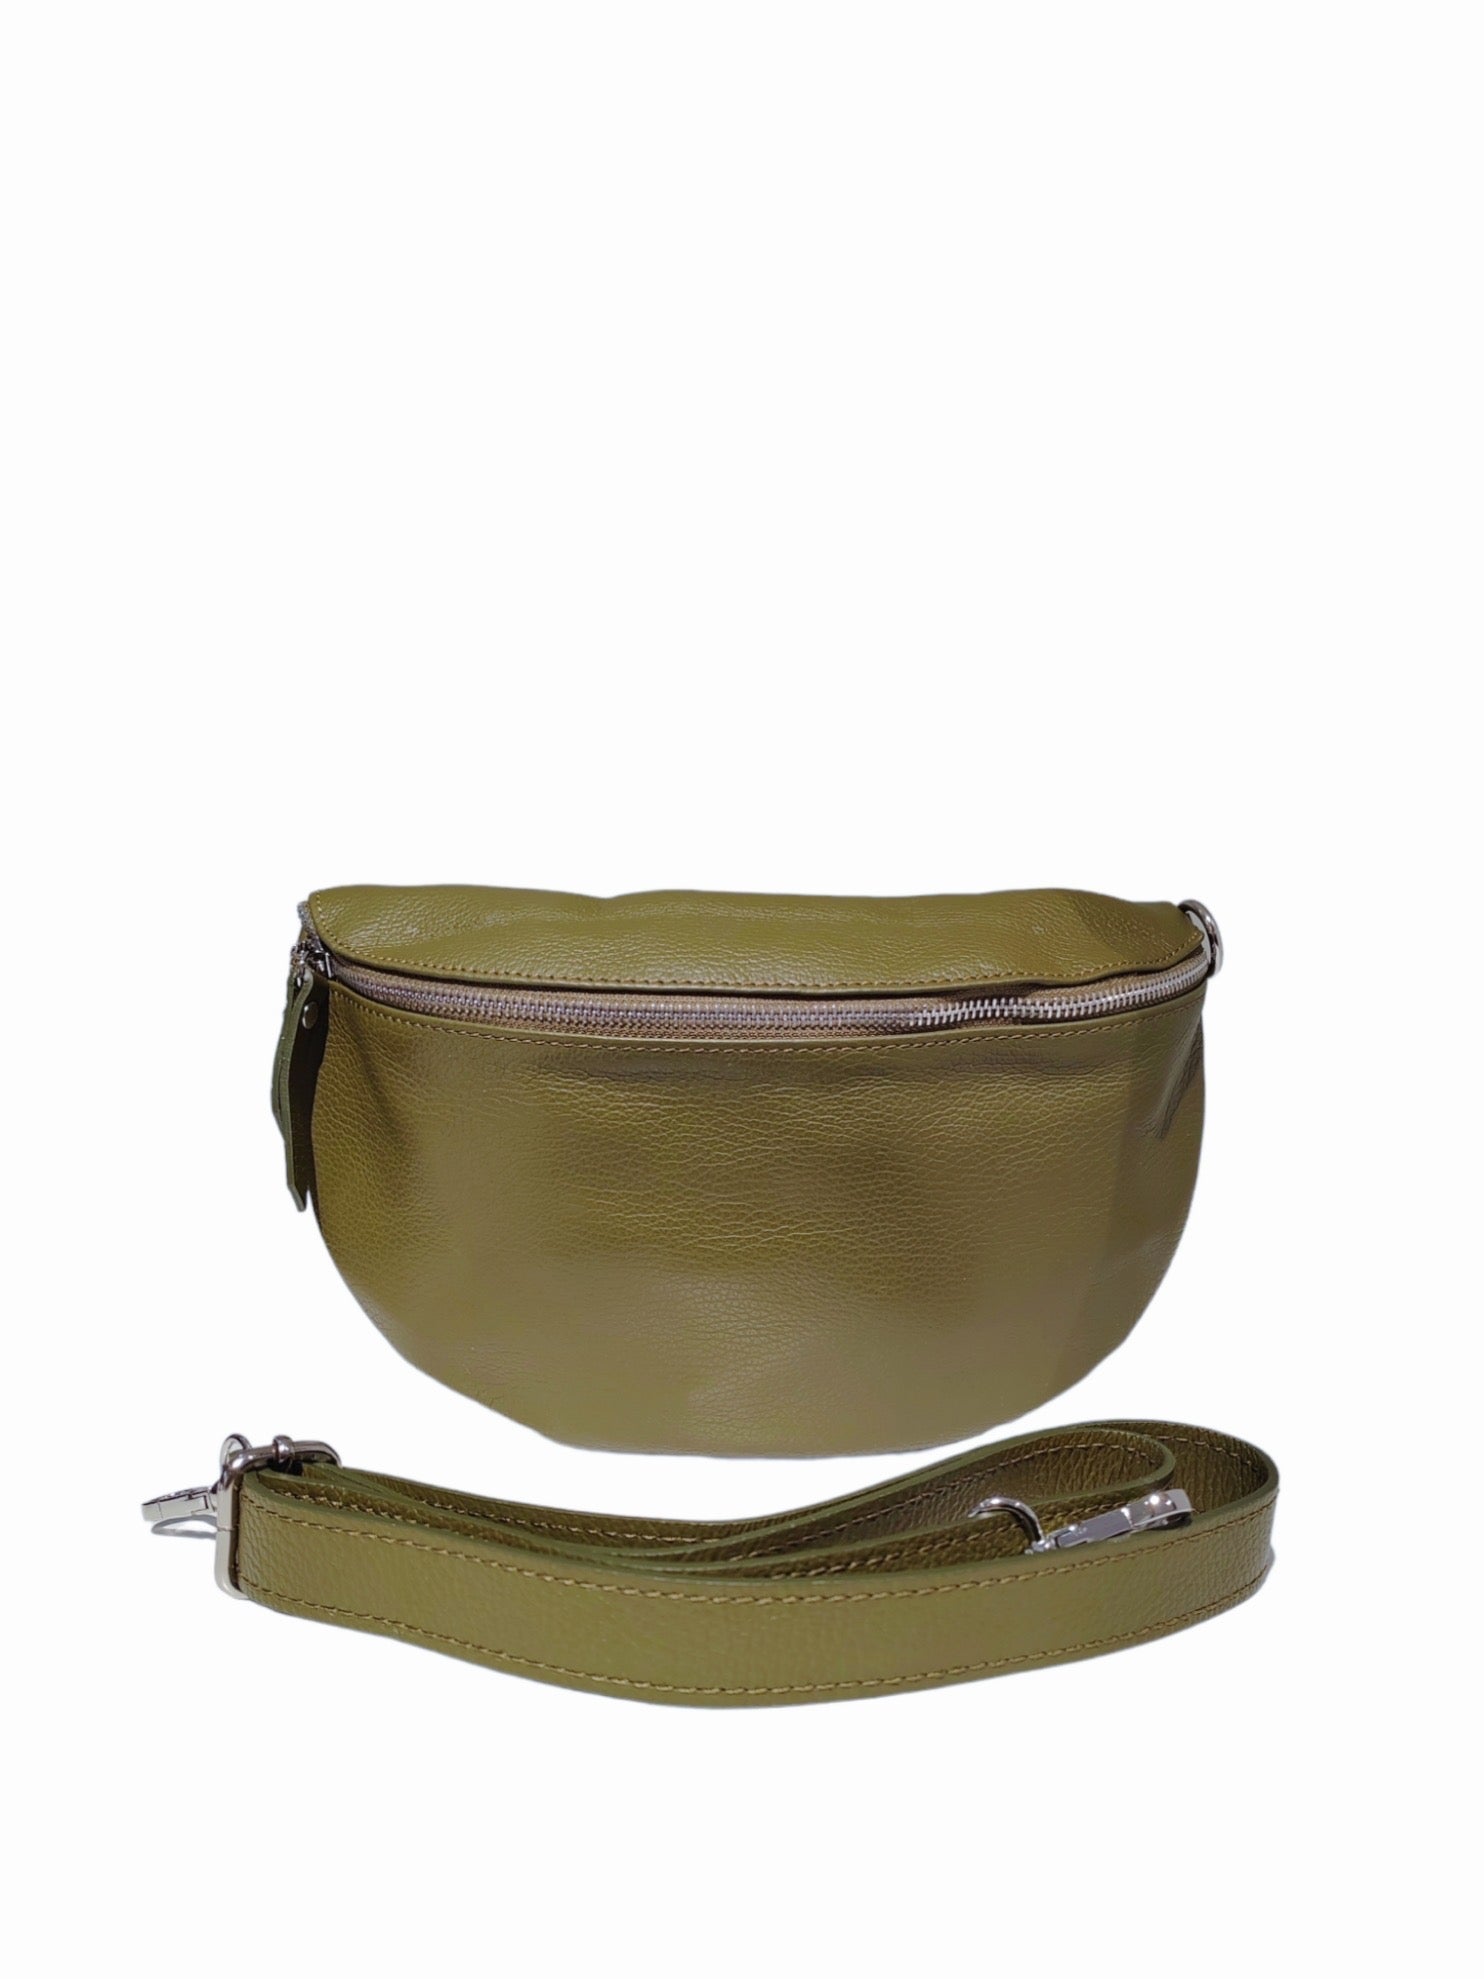 IT0195a leather bumbag big